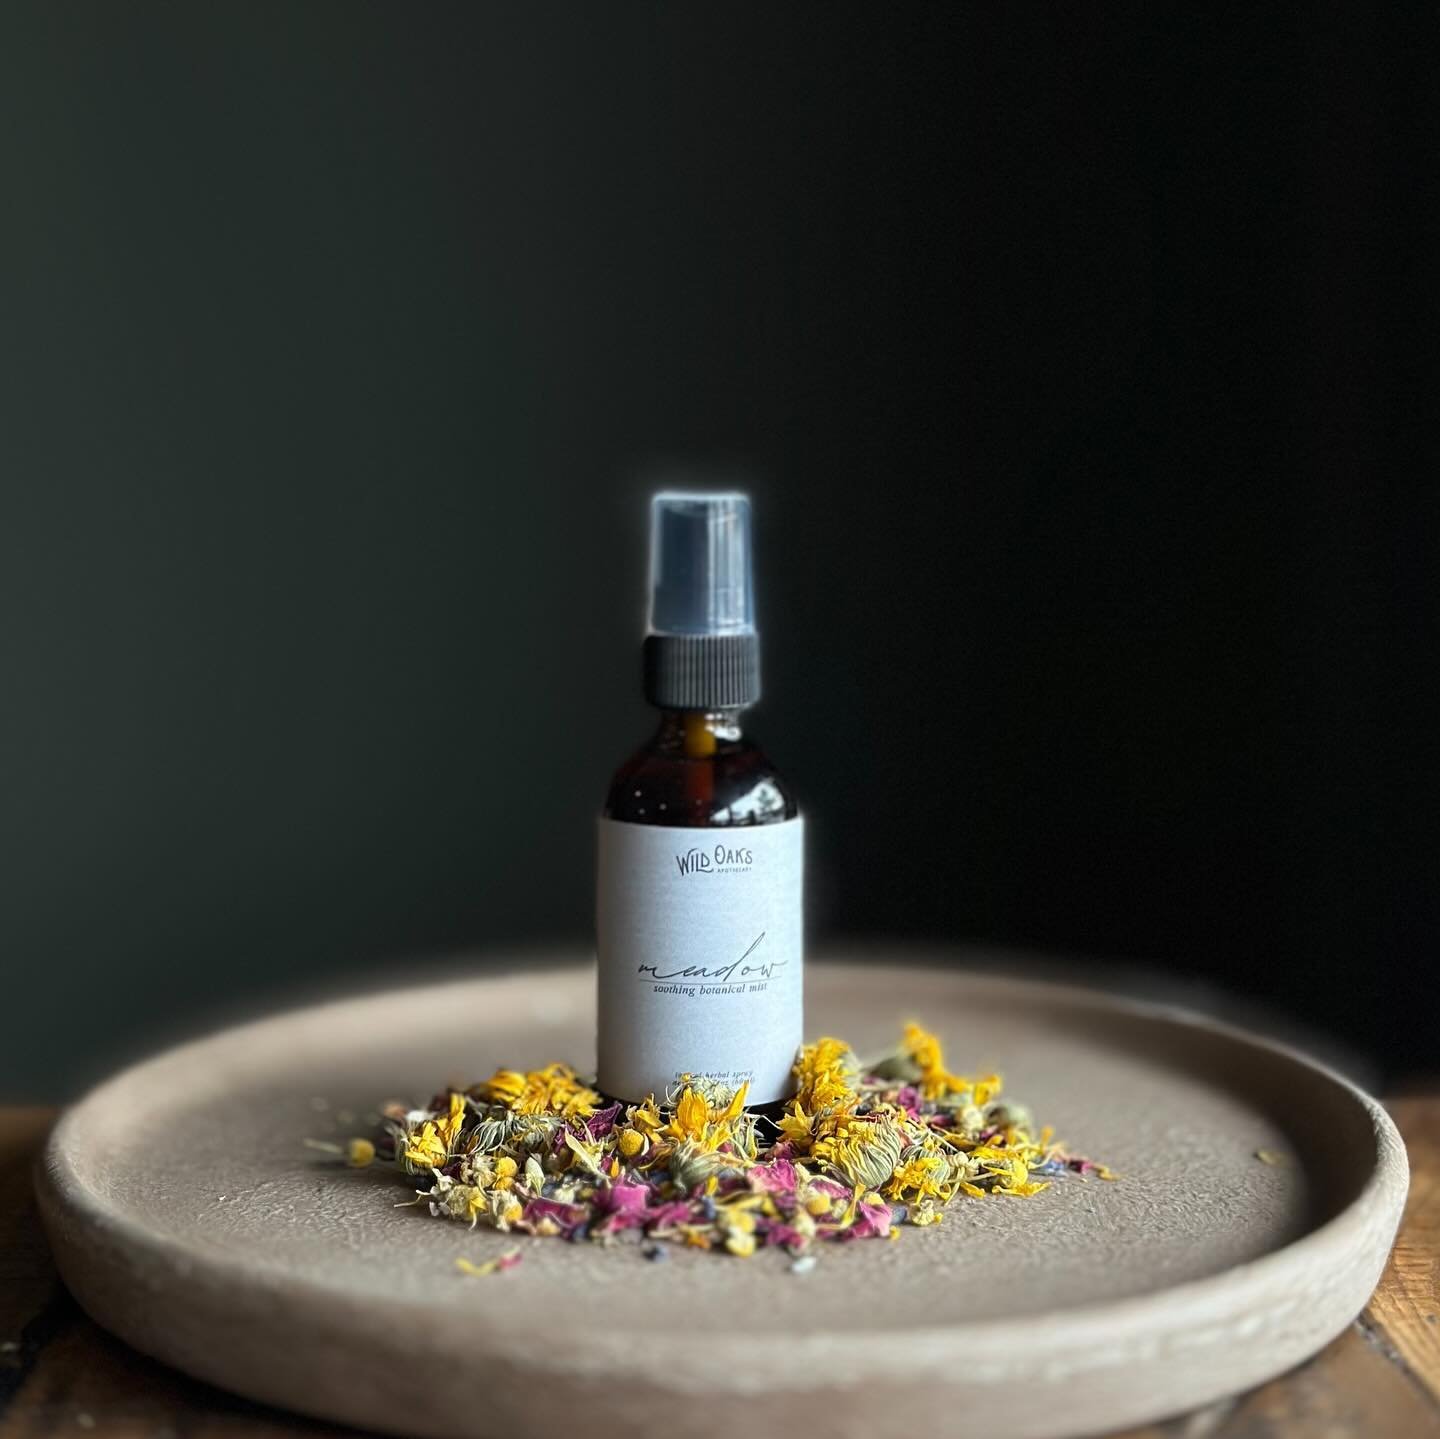 Meet: meadow. A potent botanical mist designed with women in mind. 

Previously called &ldquo;Soothing Botanical Mist&rdquo; but tweaked a bit to be extra potent. 

This botanical mist was designed as a peri spray for postpartum healing, but can also